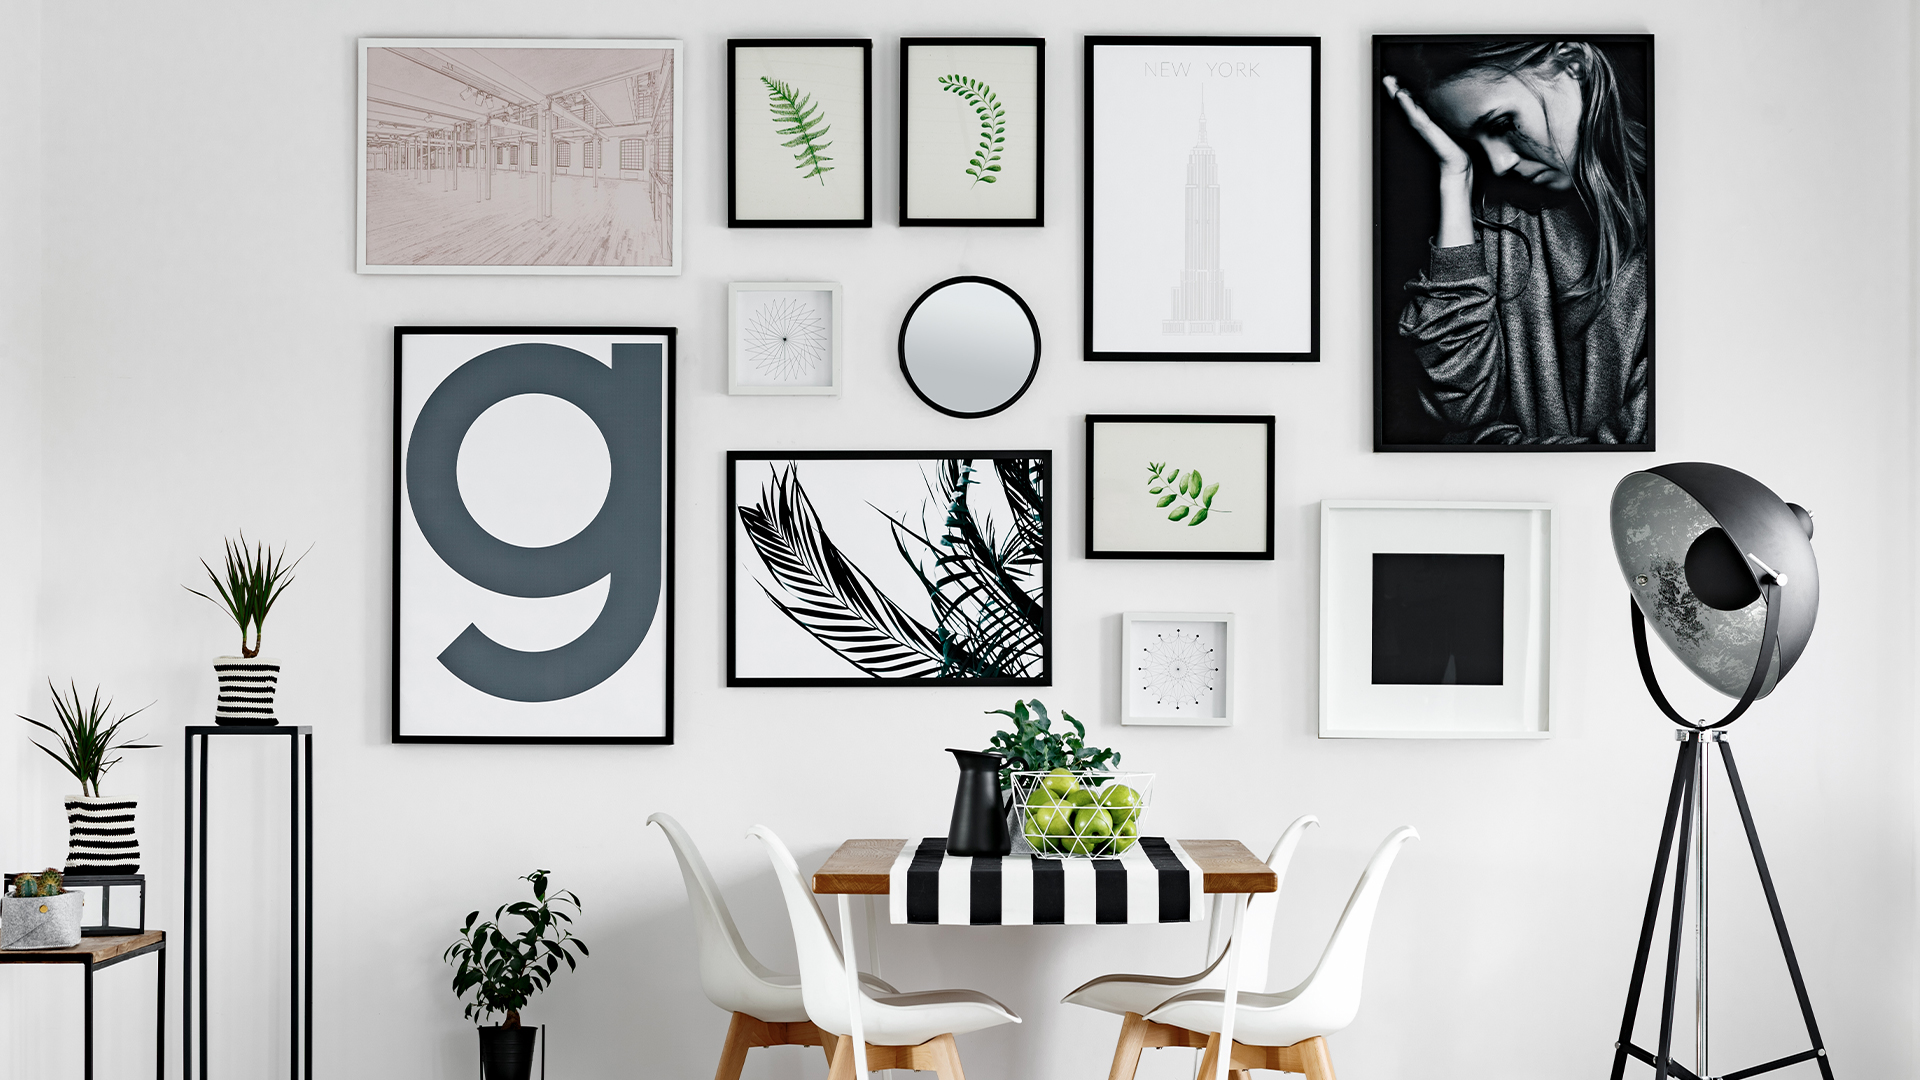 How to create a striking gallery wall in your living room